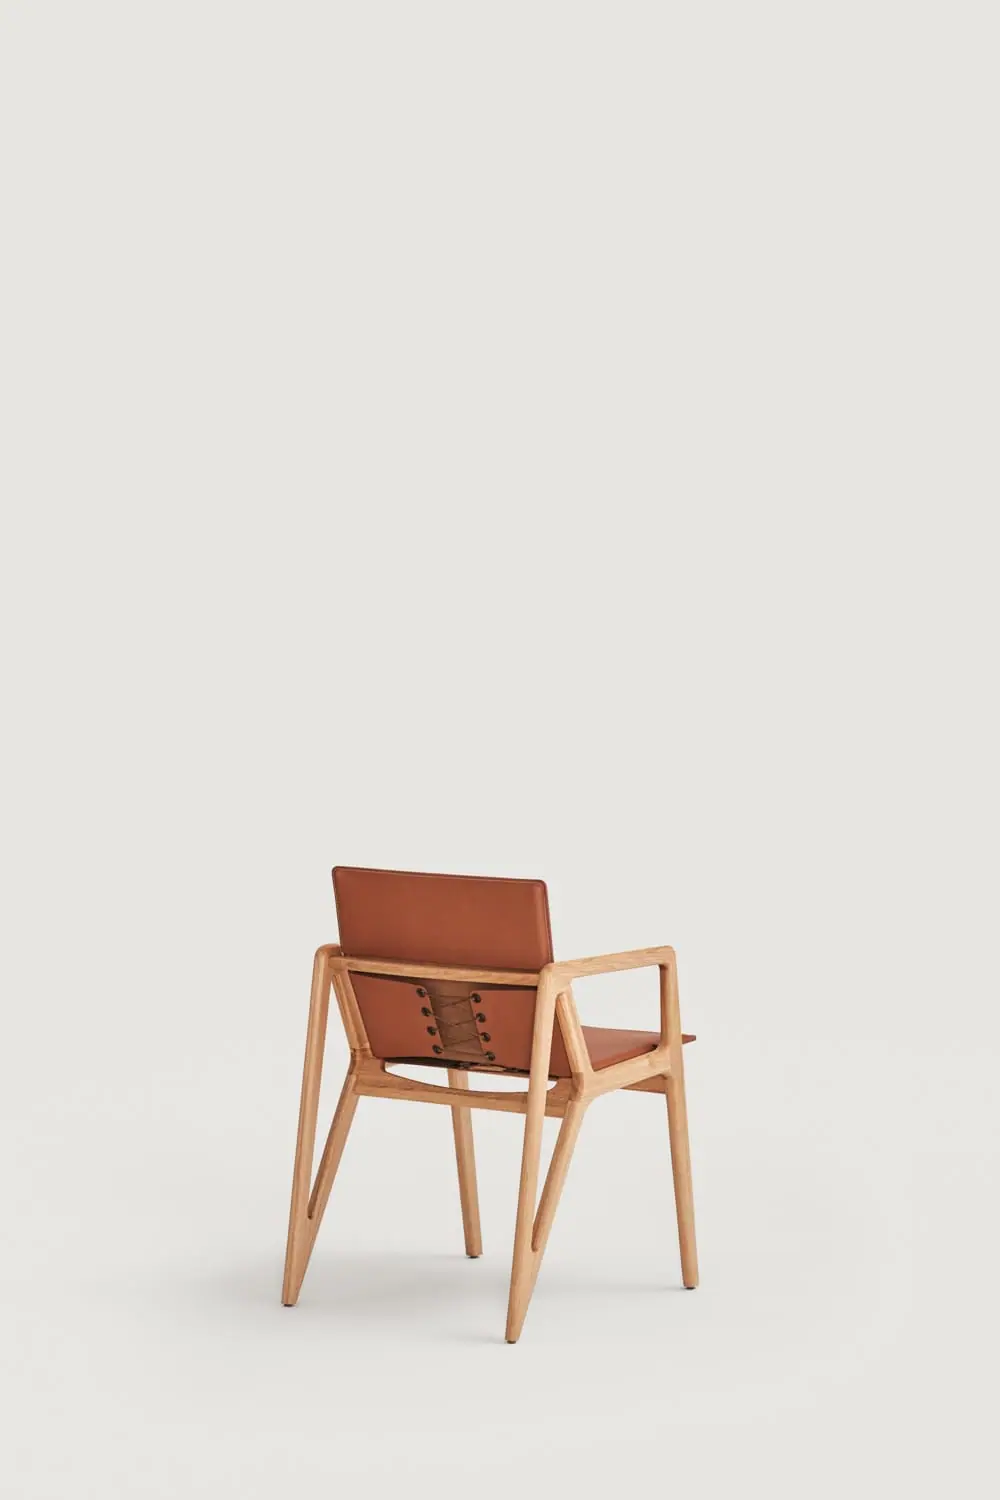 capdell-atria-chair-03